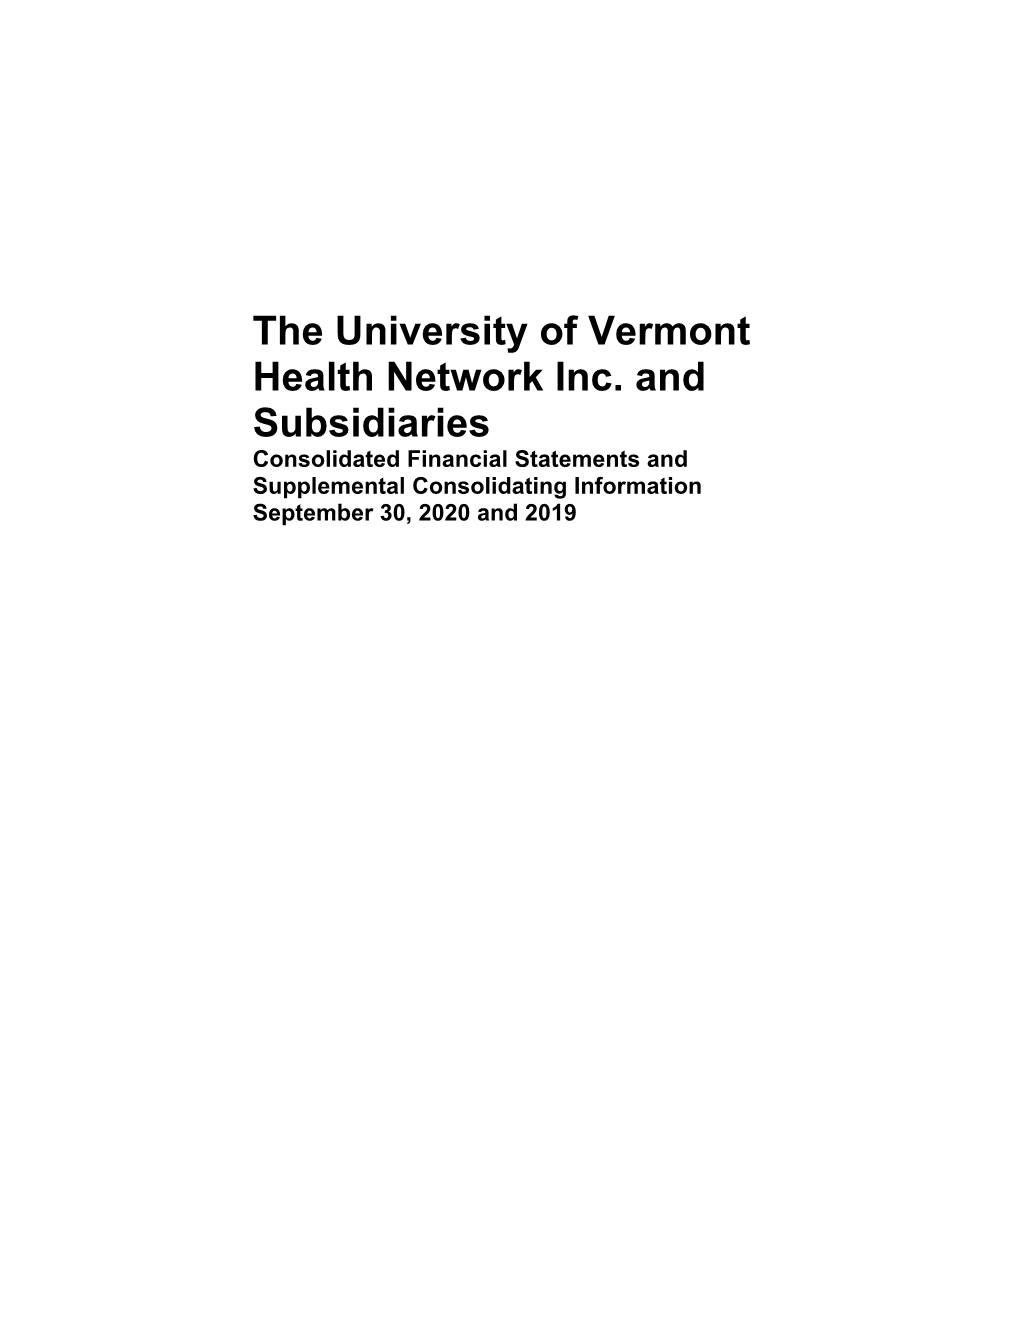 The University of Vermont Health Network Inc. and Subsidiaries